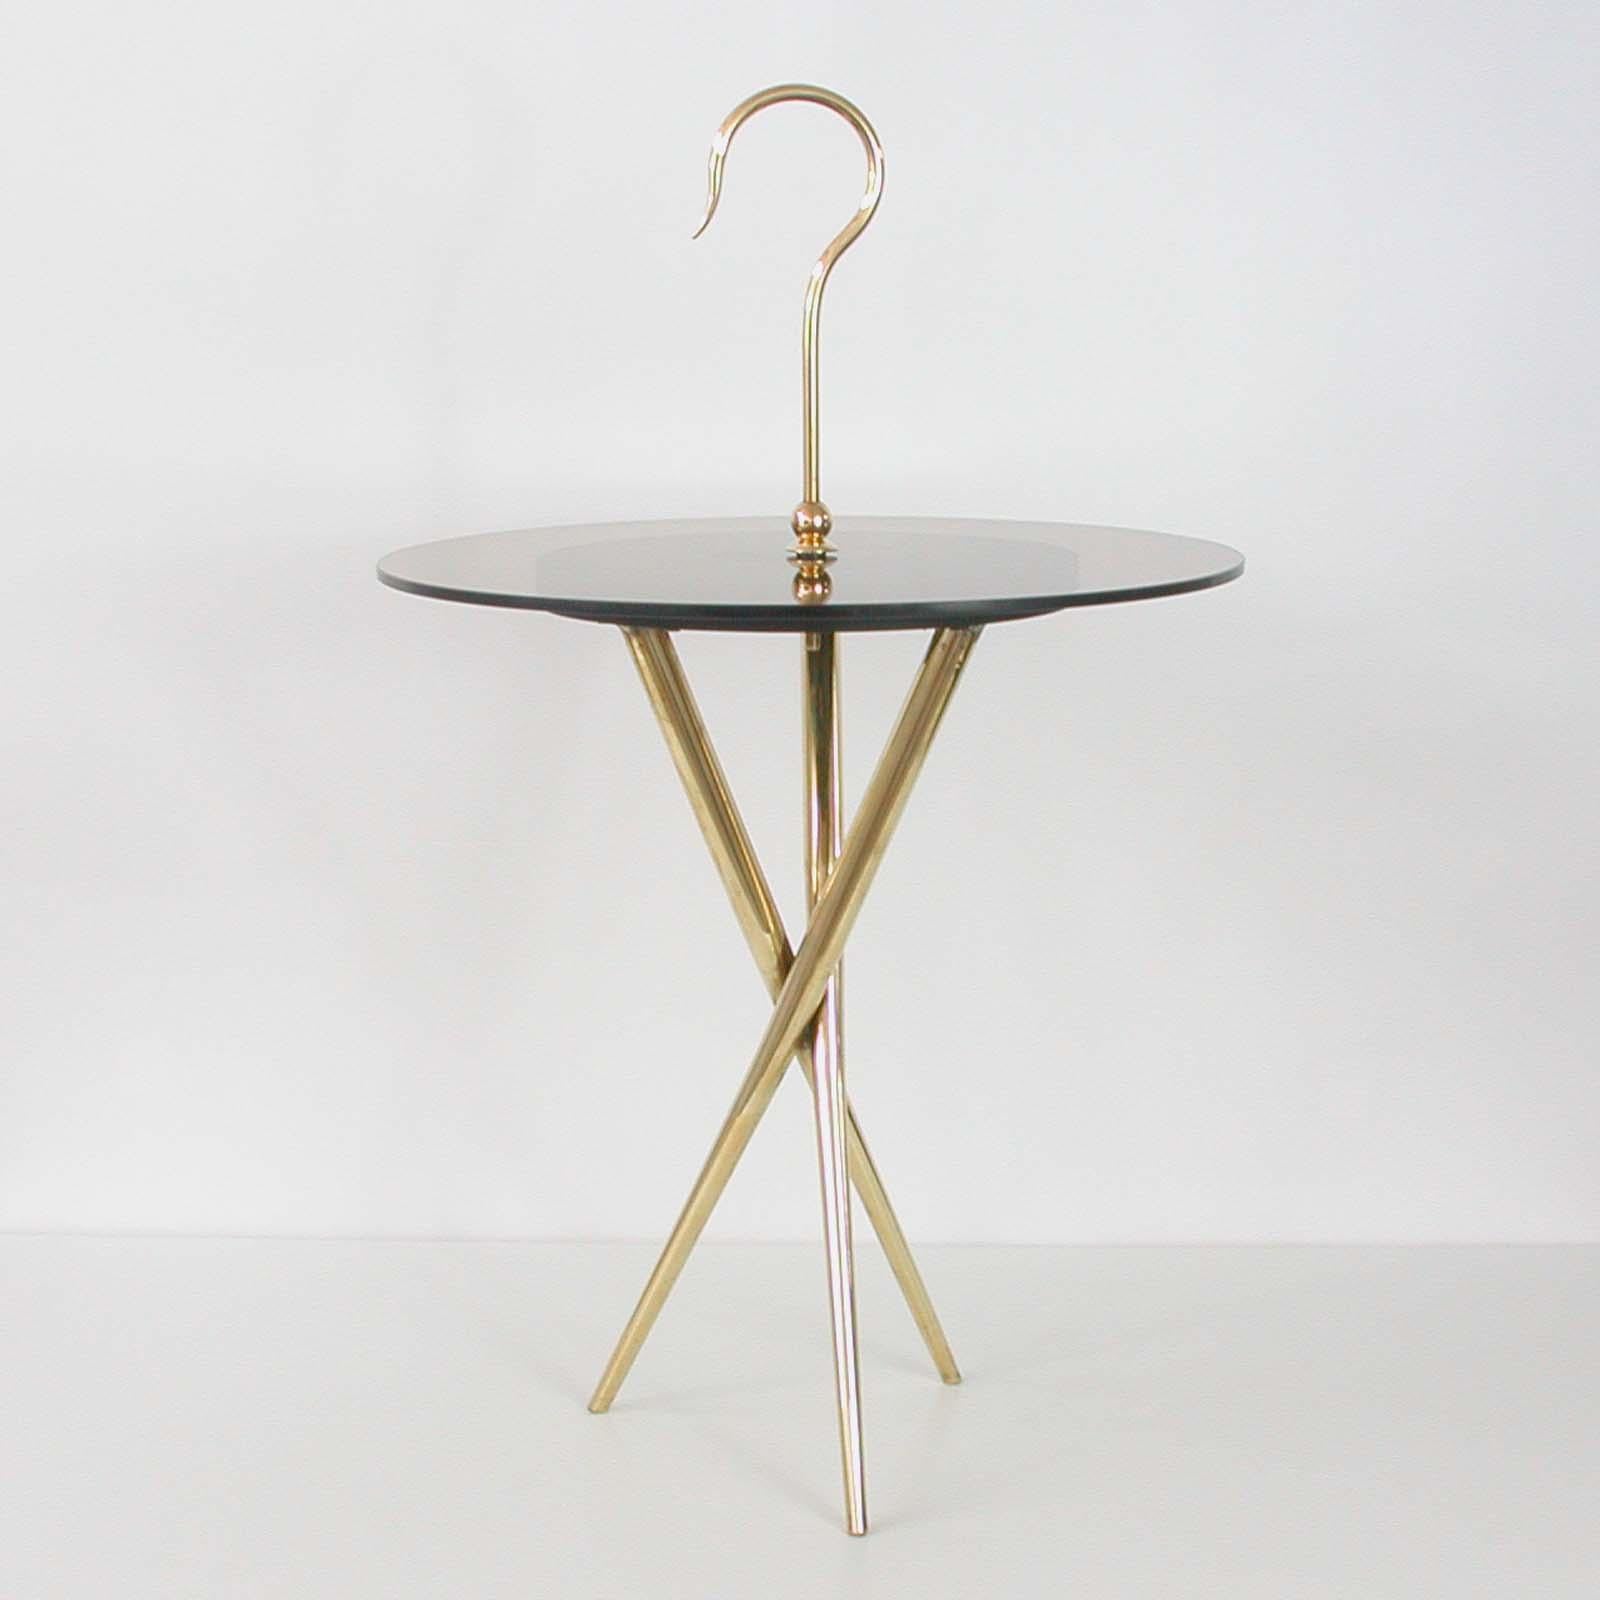 Italian Midcentury Brass and Tinted Glass Occasional Table, 1950s For Sale 1